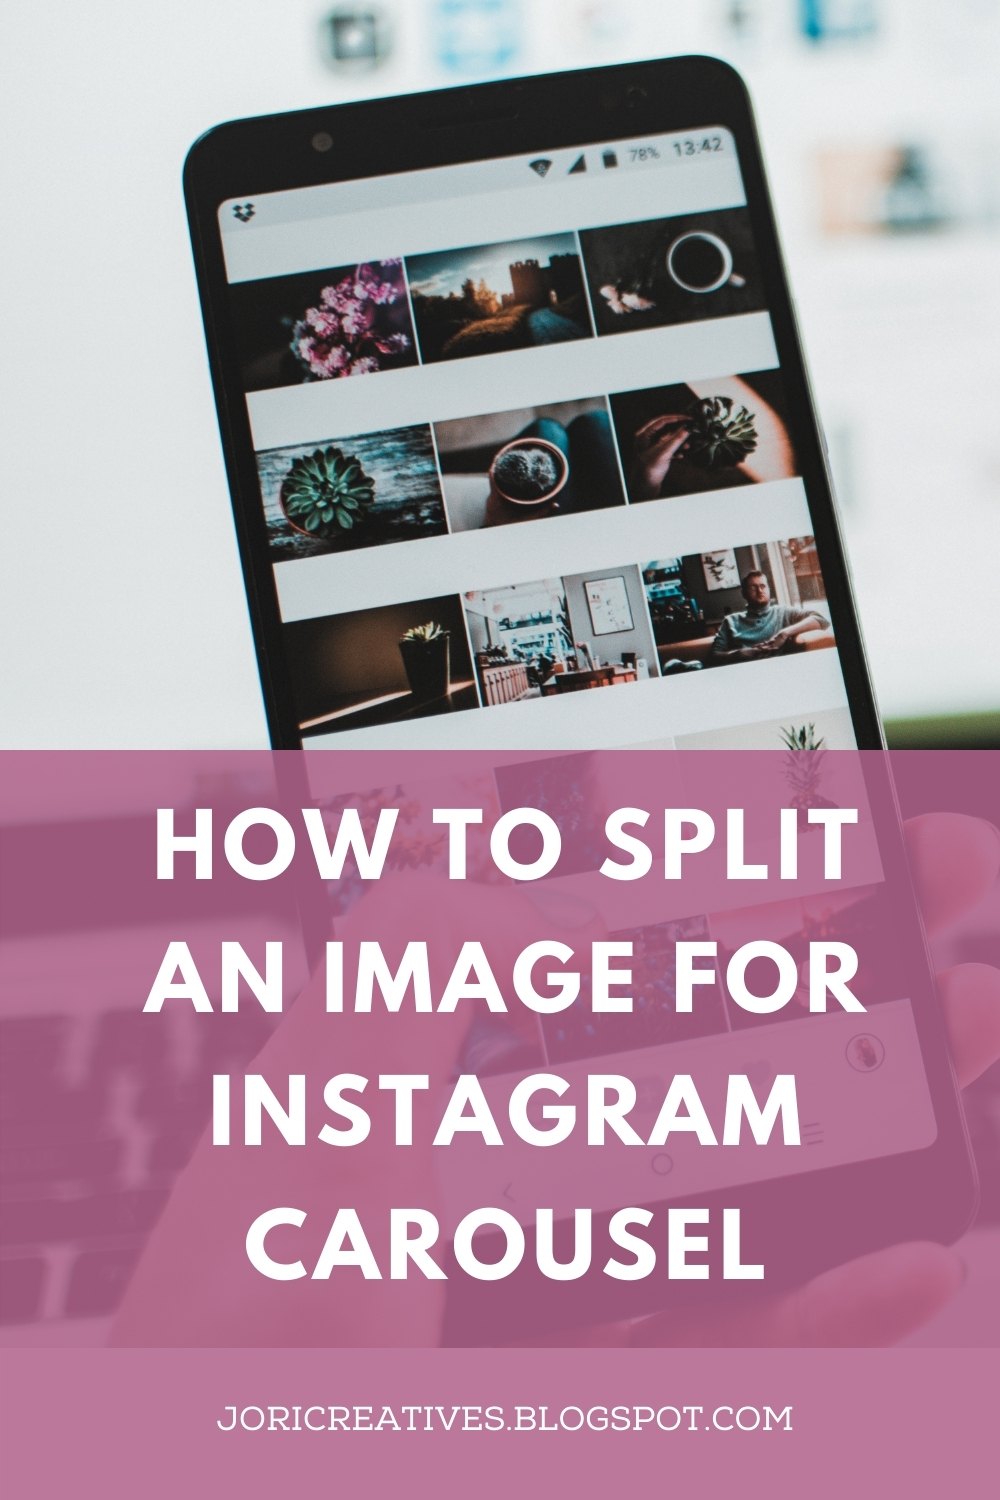 How to Split Images For Instagram Seamless carousel posts.